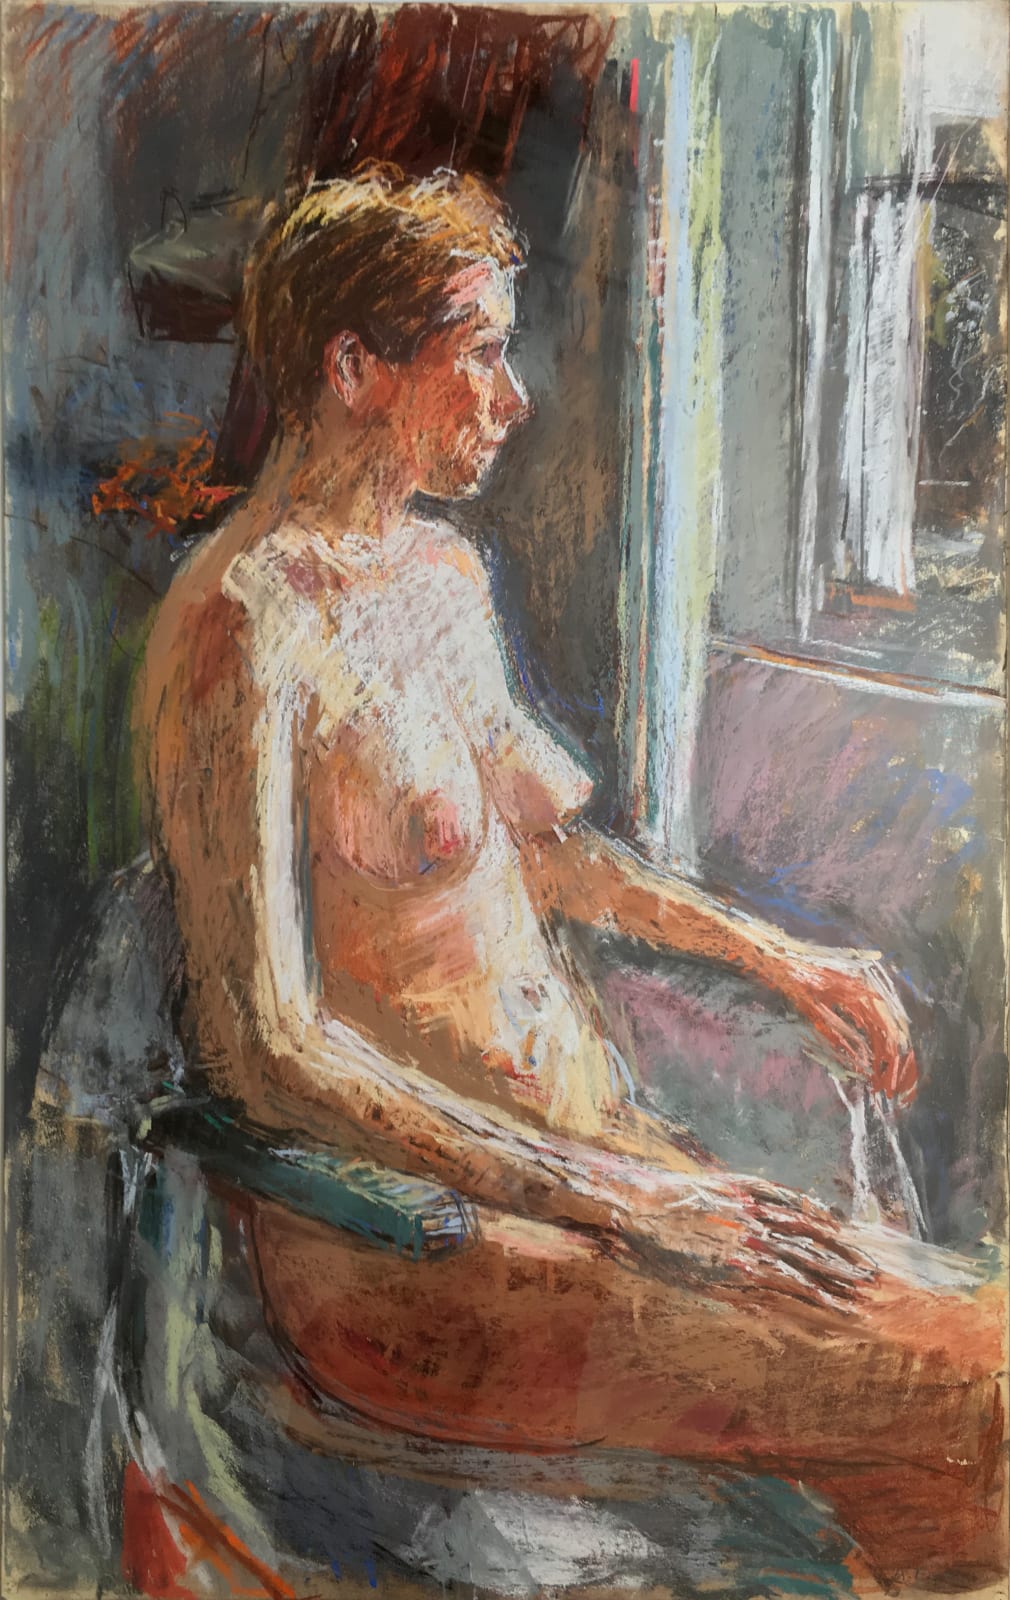 ANTHONY EYTON, Nude in the Bedroom, 1991